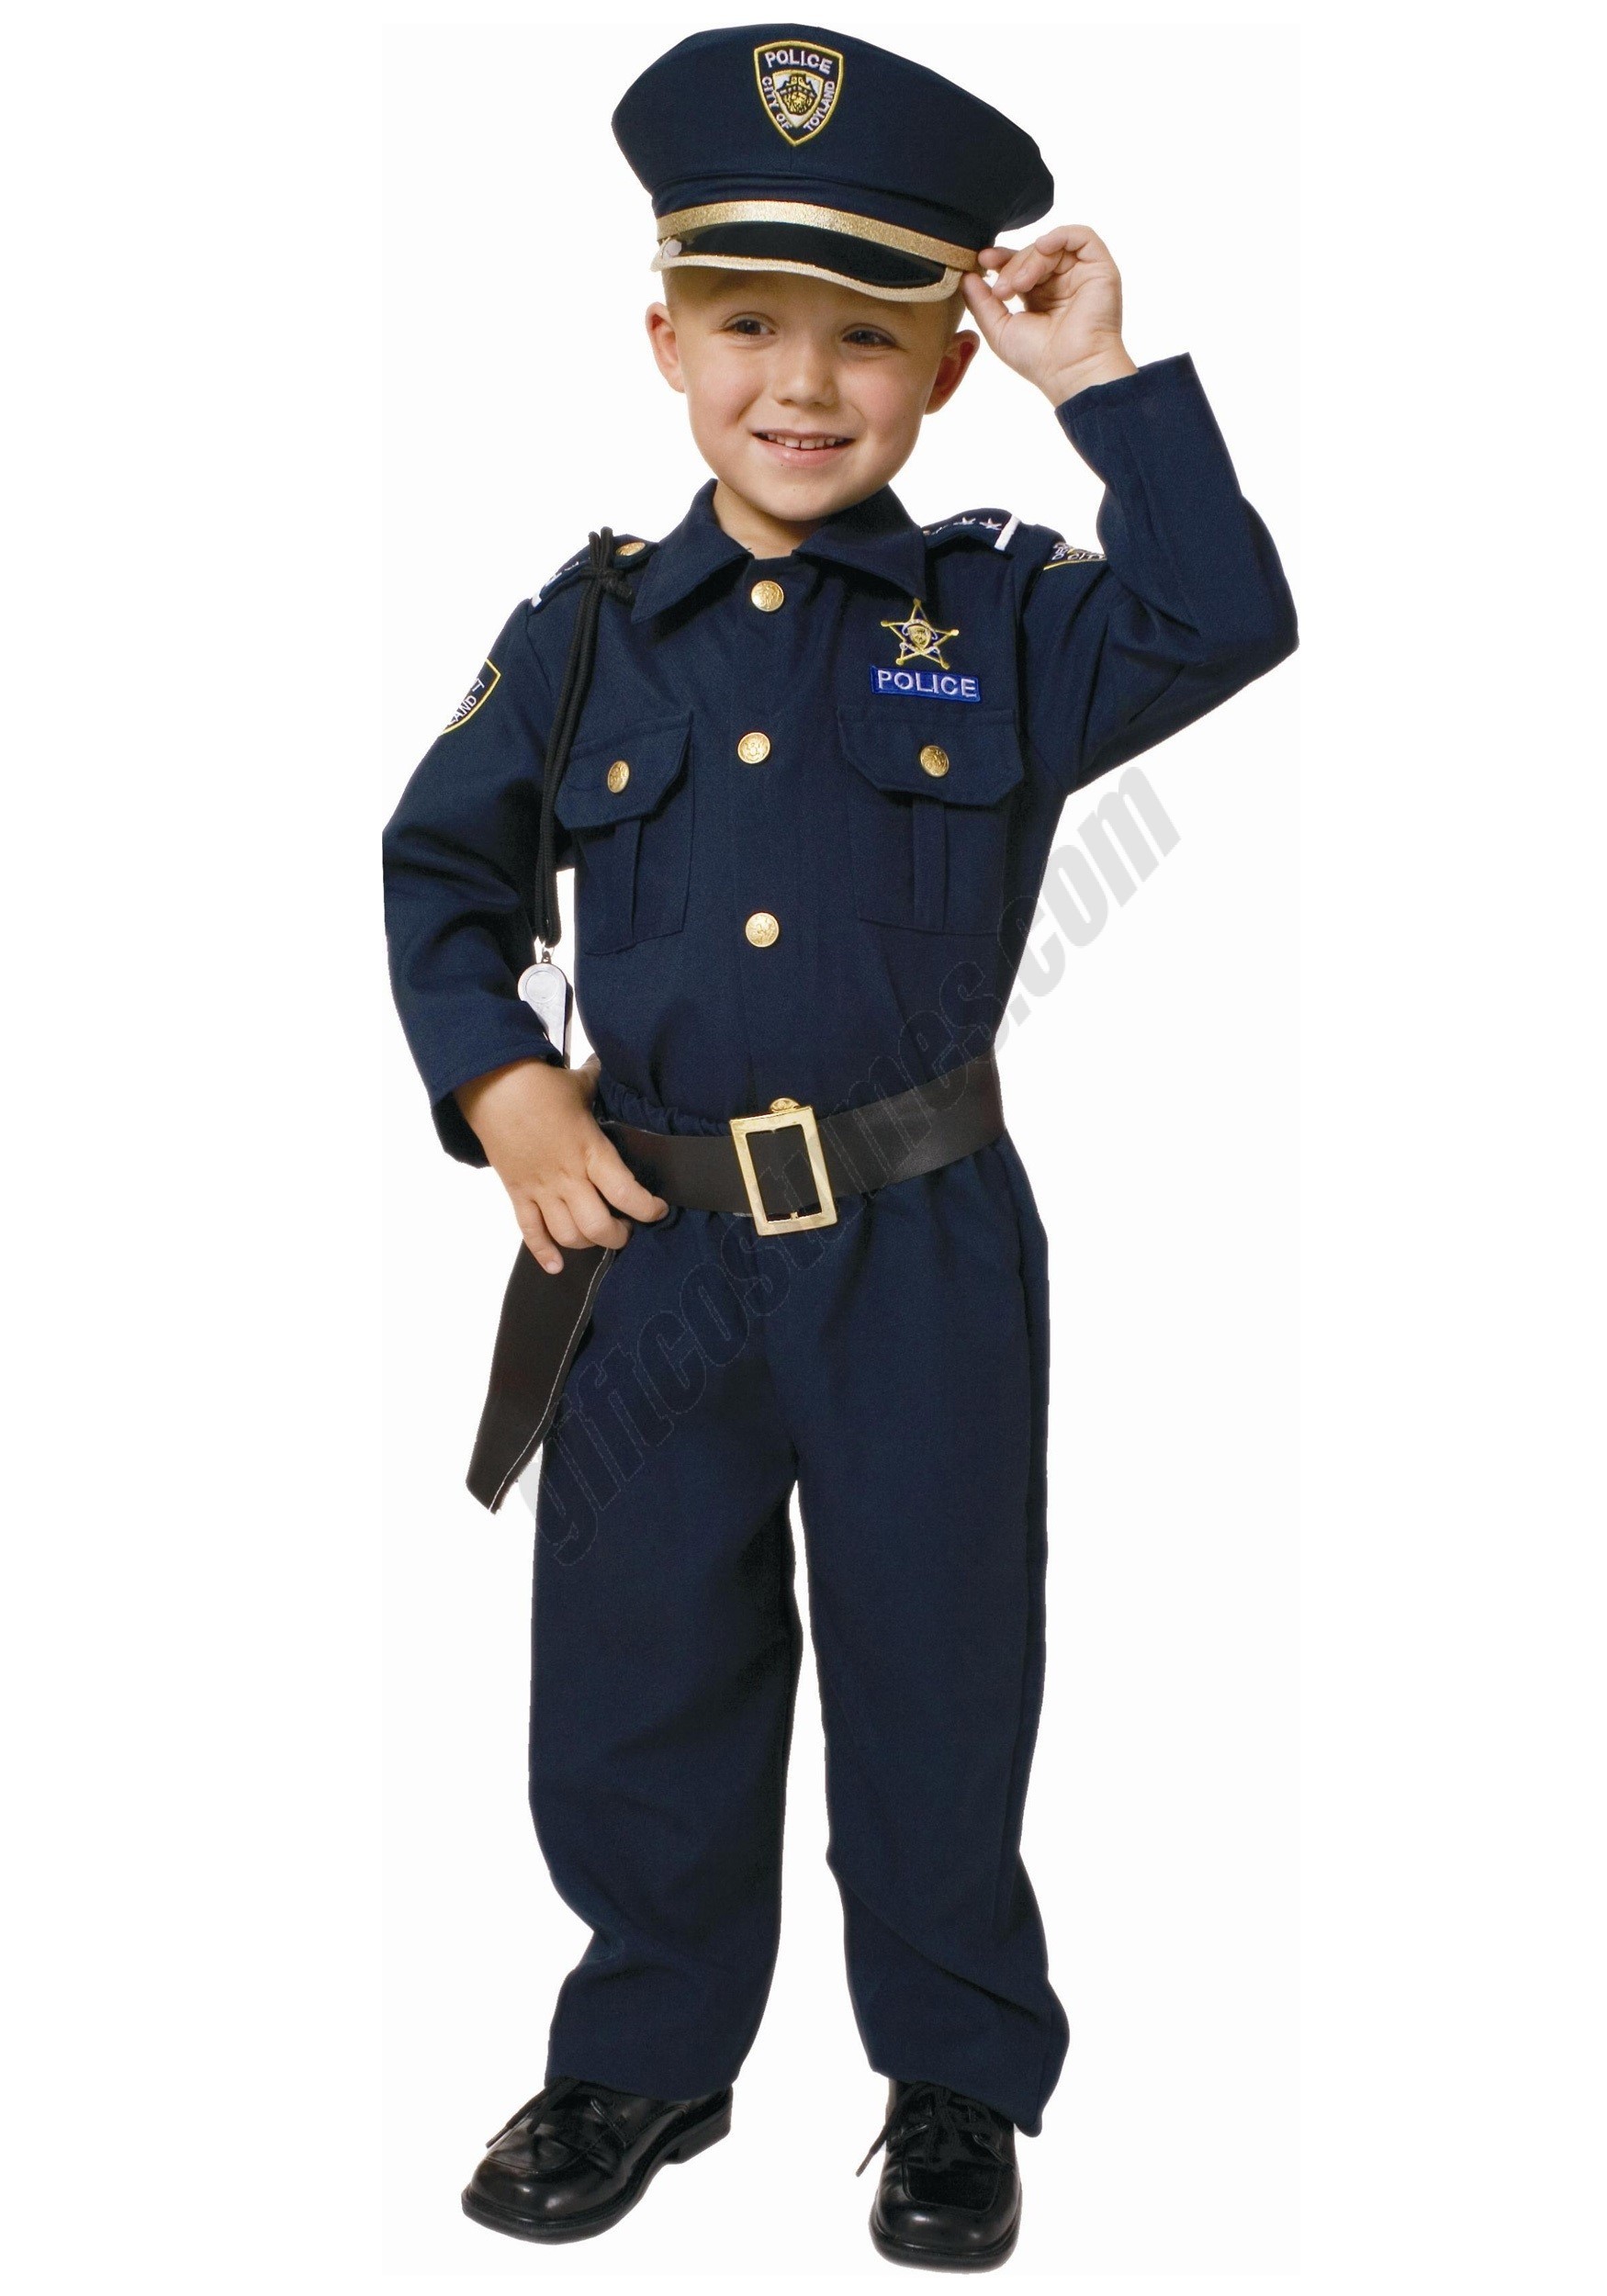 Deluxe Police Officer Toddler Costume Promotions - Deluxe Police Officer Toddler Costume Promotions